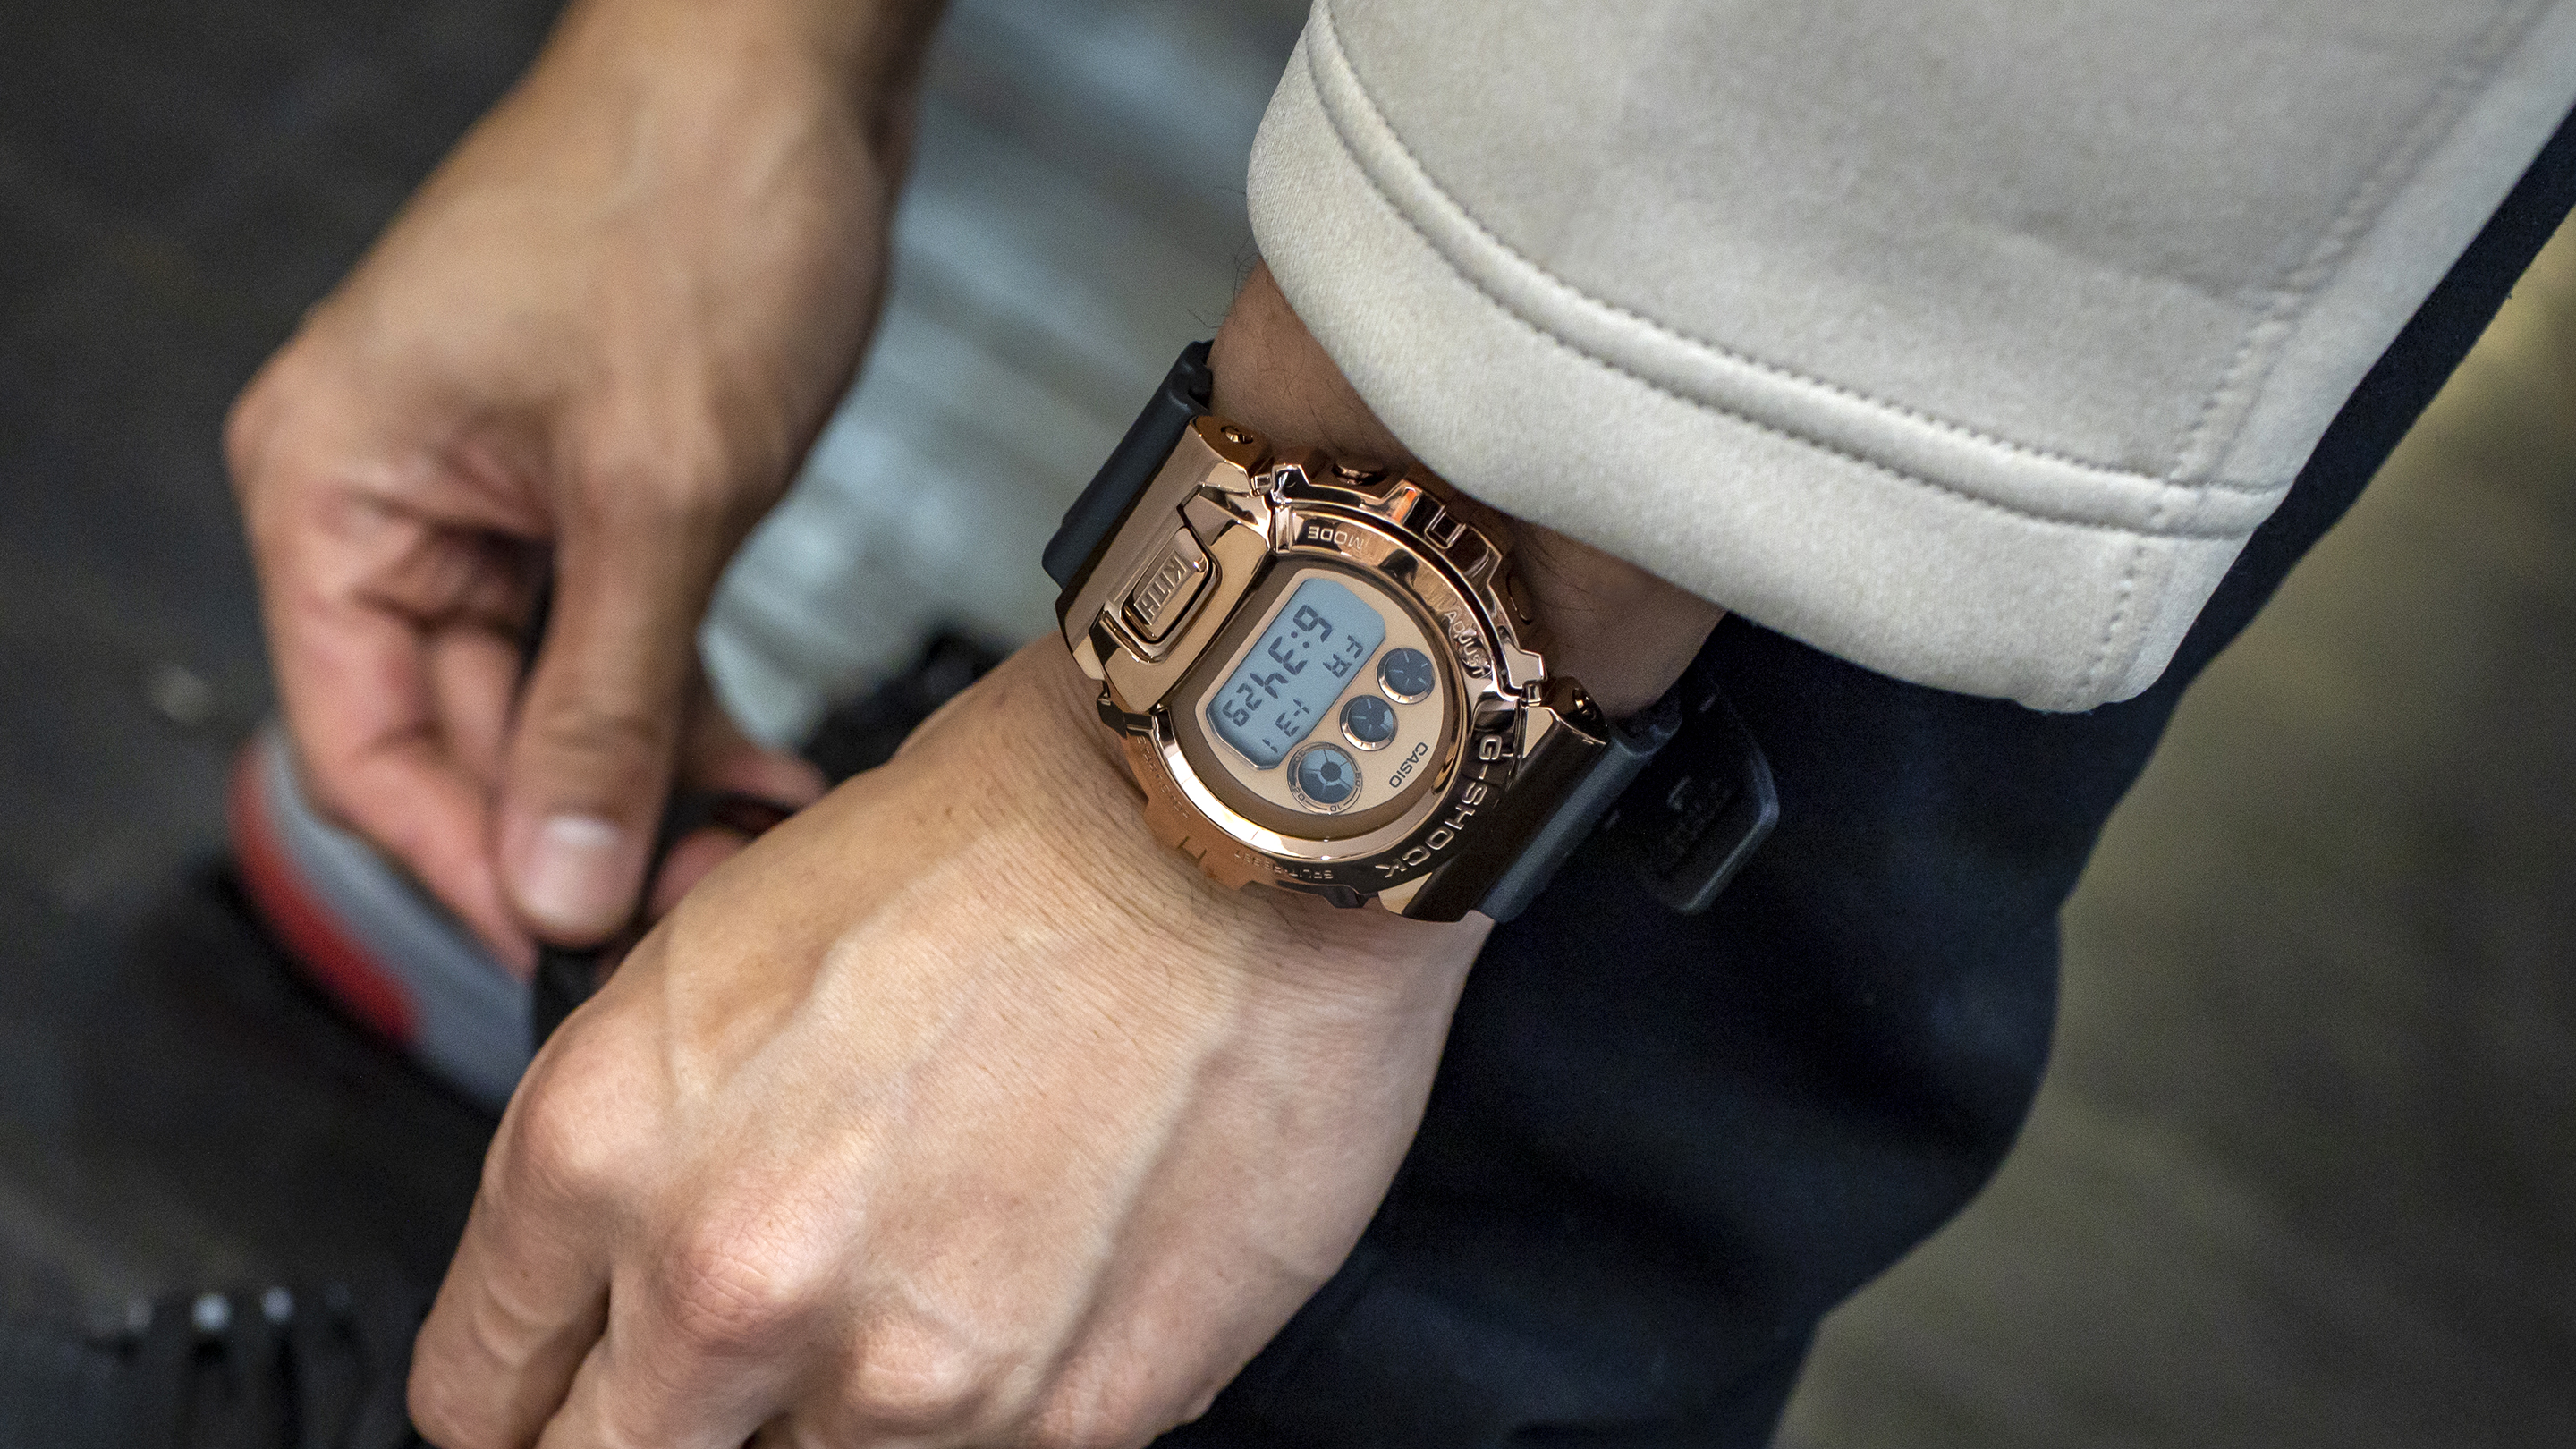 KITH G-SHOCK | escapeauthority.com